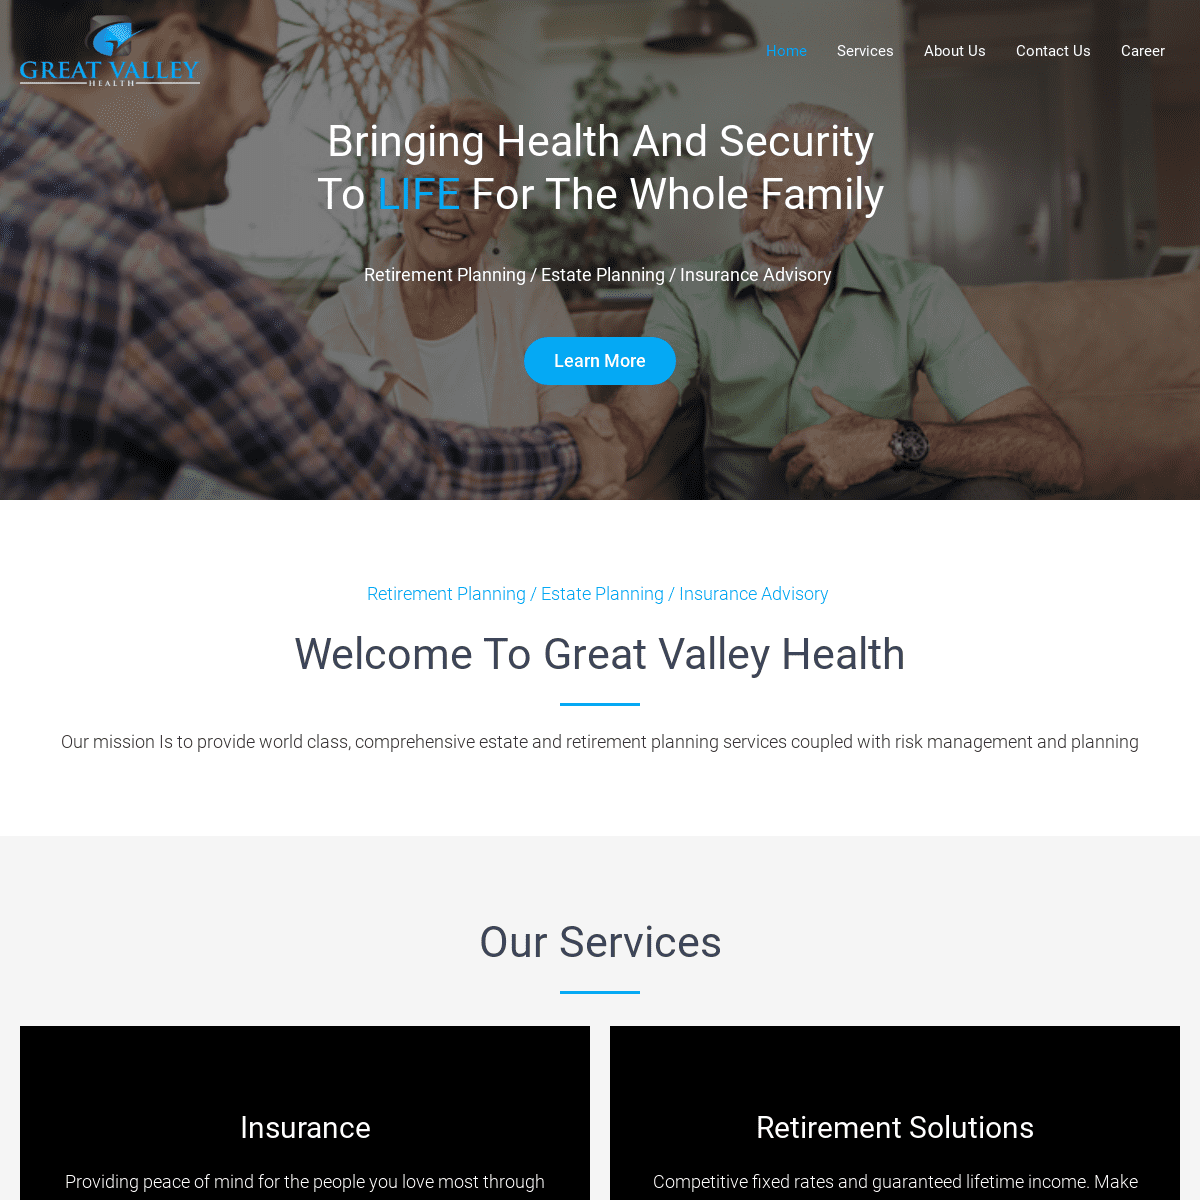 A complete backup of greatvalleyhealth.com